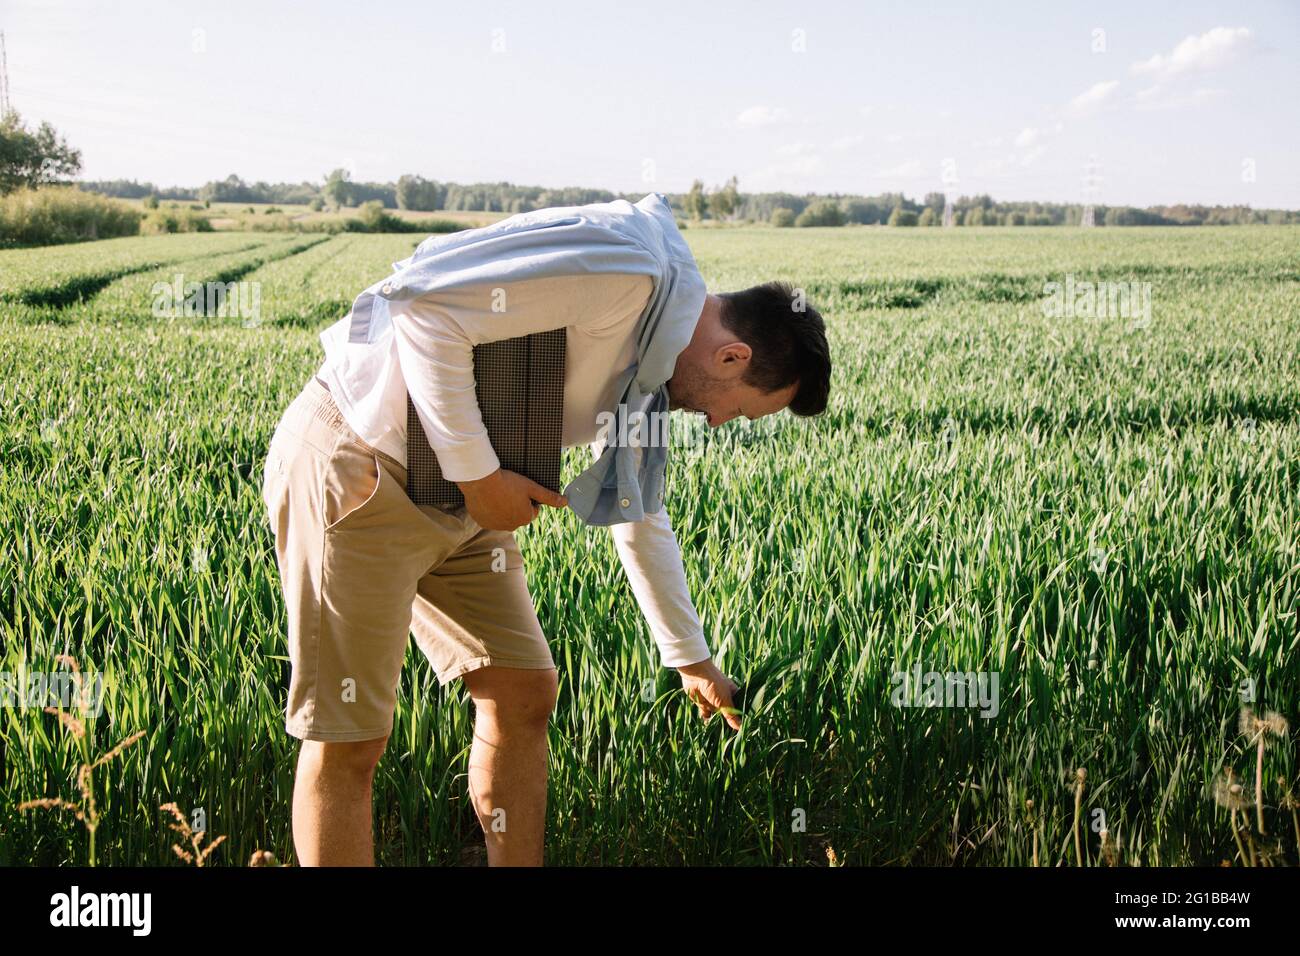 Young farmer with folder under his arm 40 years old checking his forage crop, small bussiness concept Stock Photo